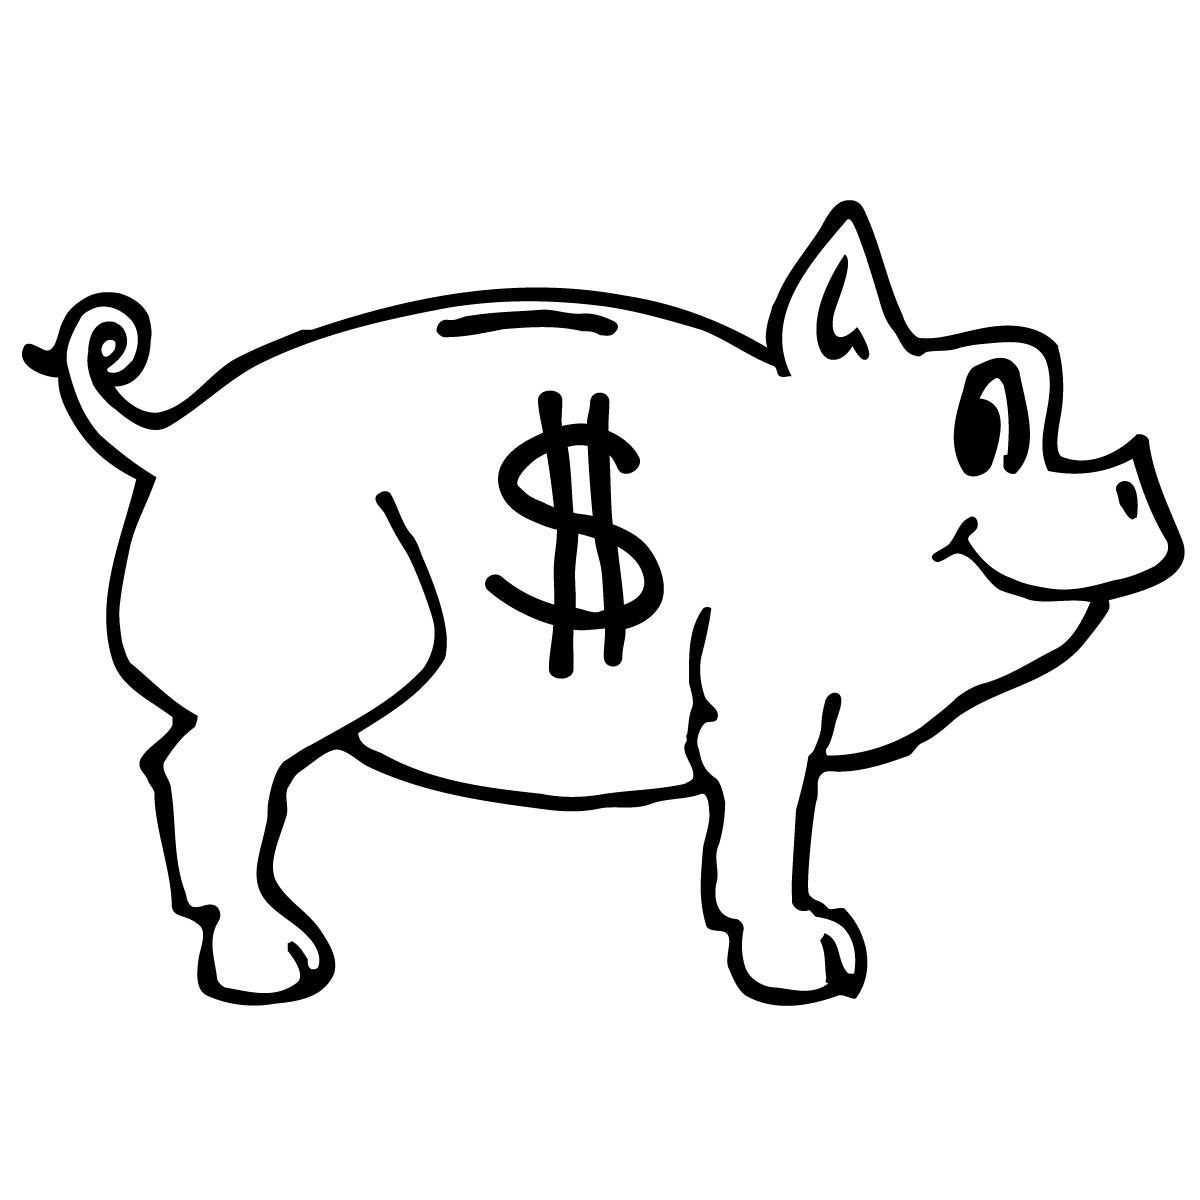 Coloring pages of a pig - Coloring Pages & Pictures - IMAGIXS